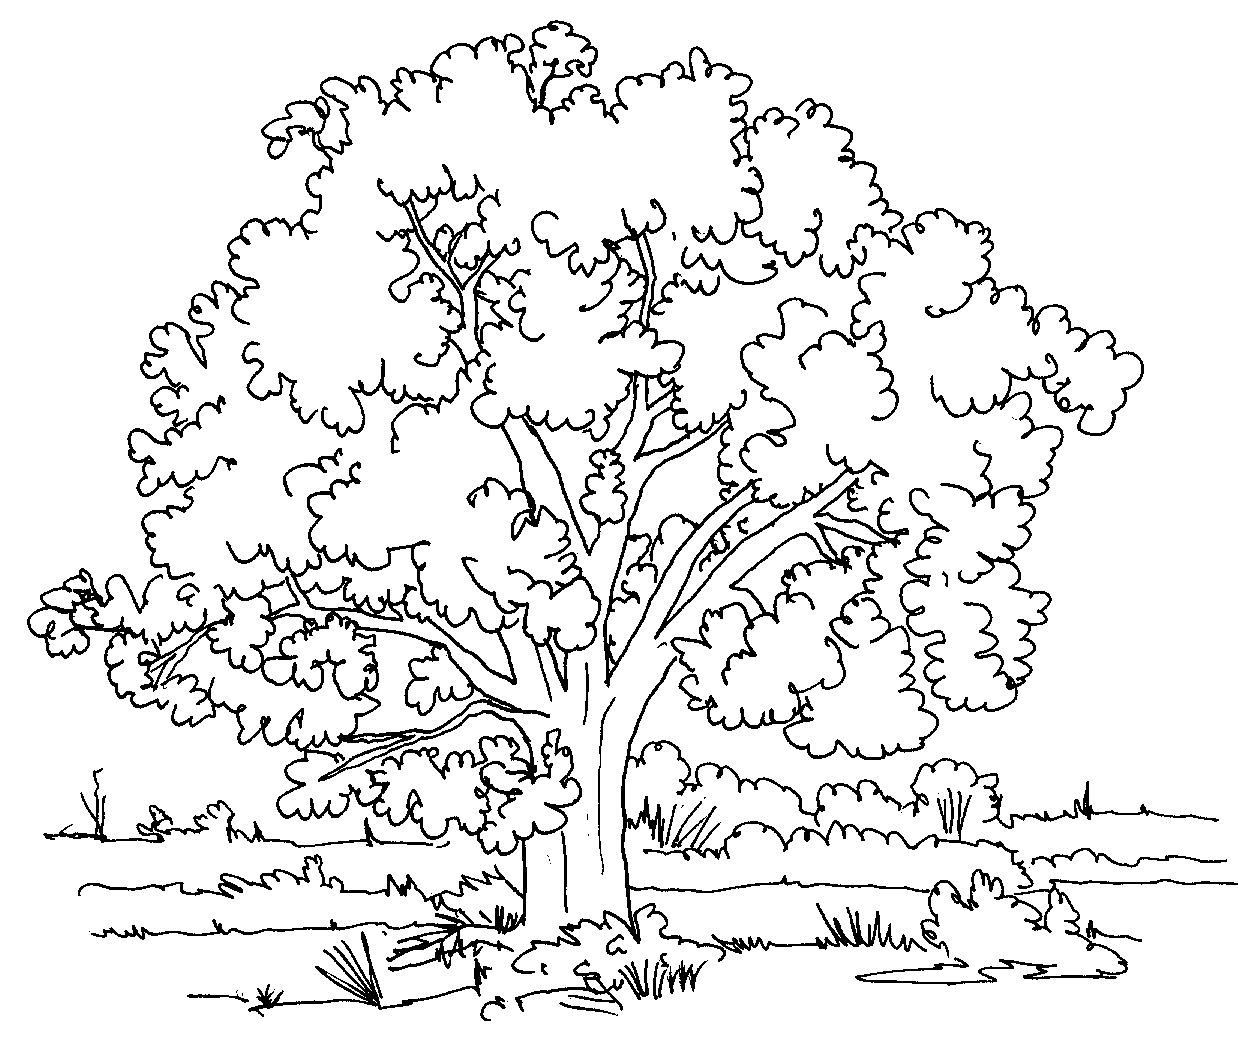 nature colouring pictures nature coloring pages to download and print for free nature colouring pictures 